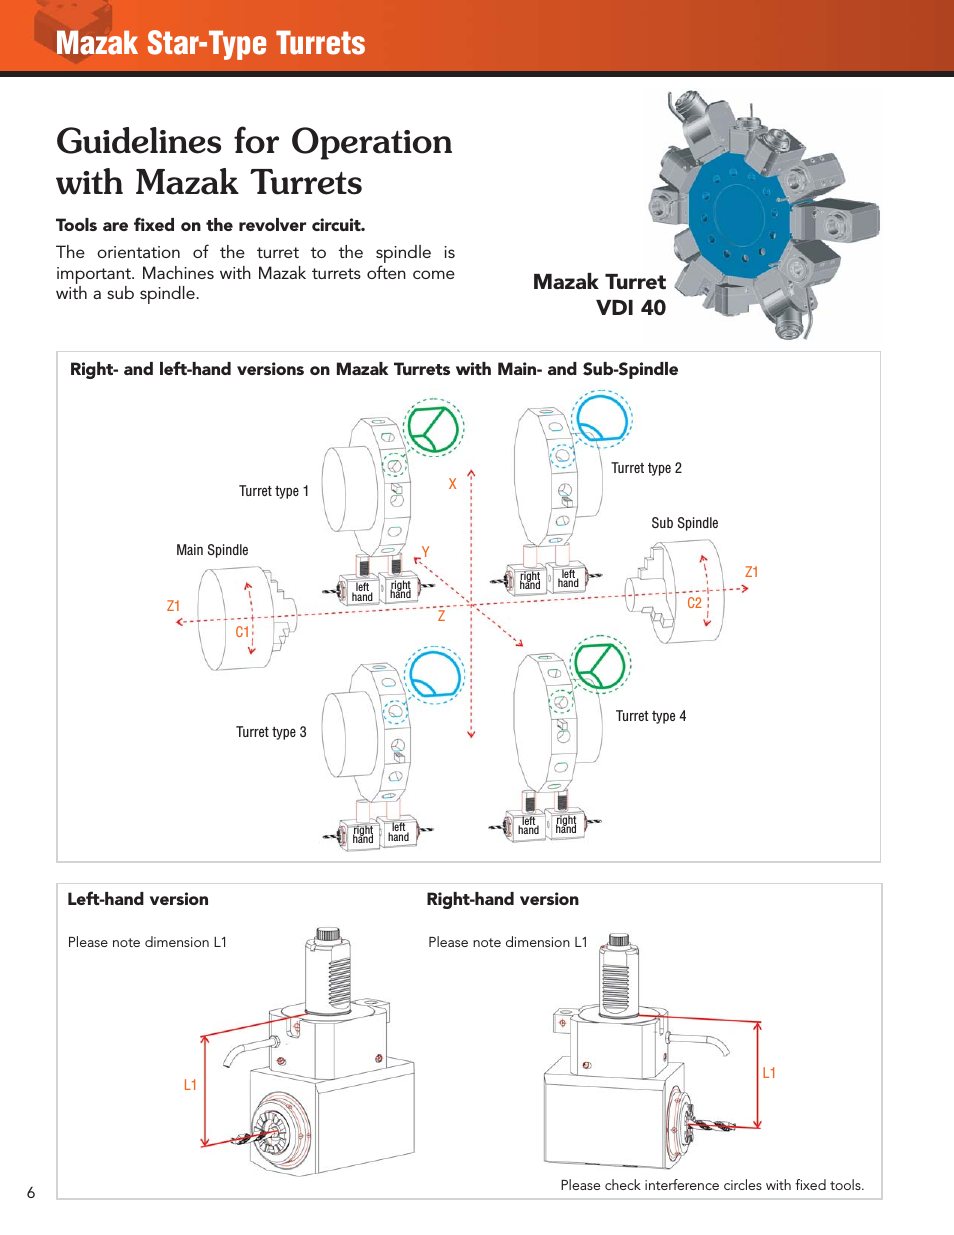 Guidelines for operation with Mazak turrets